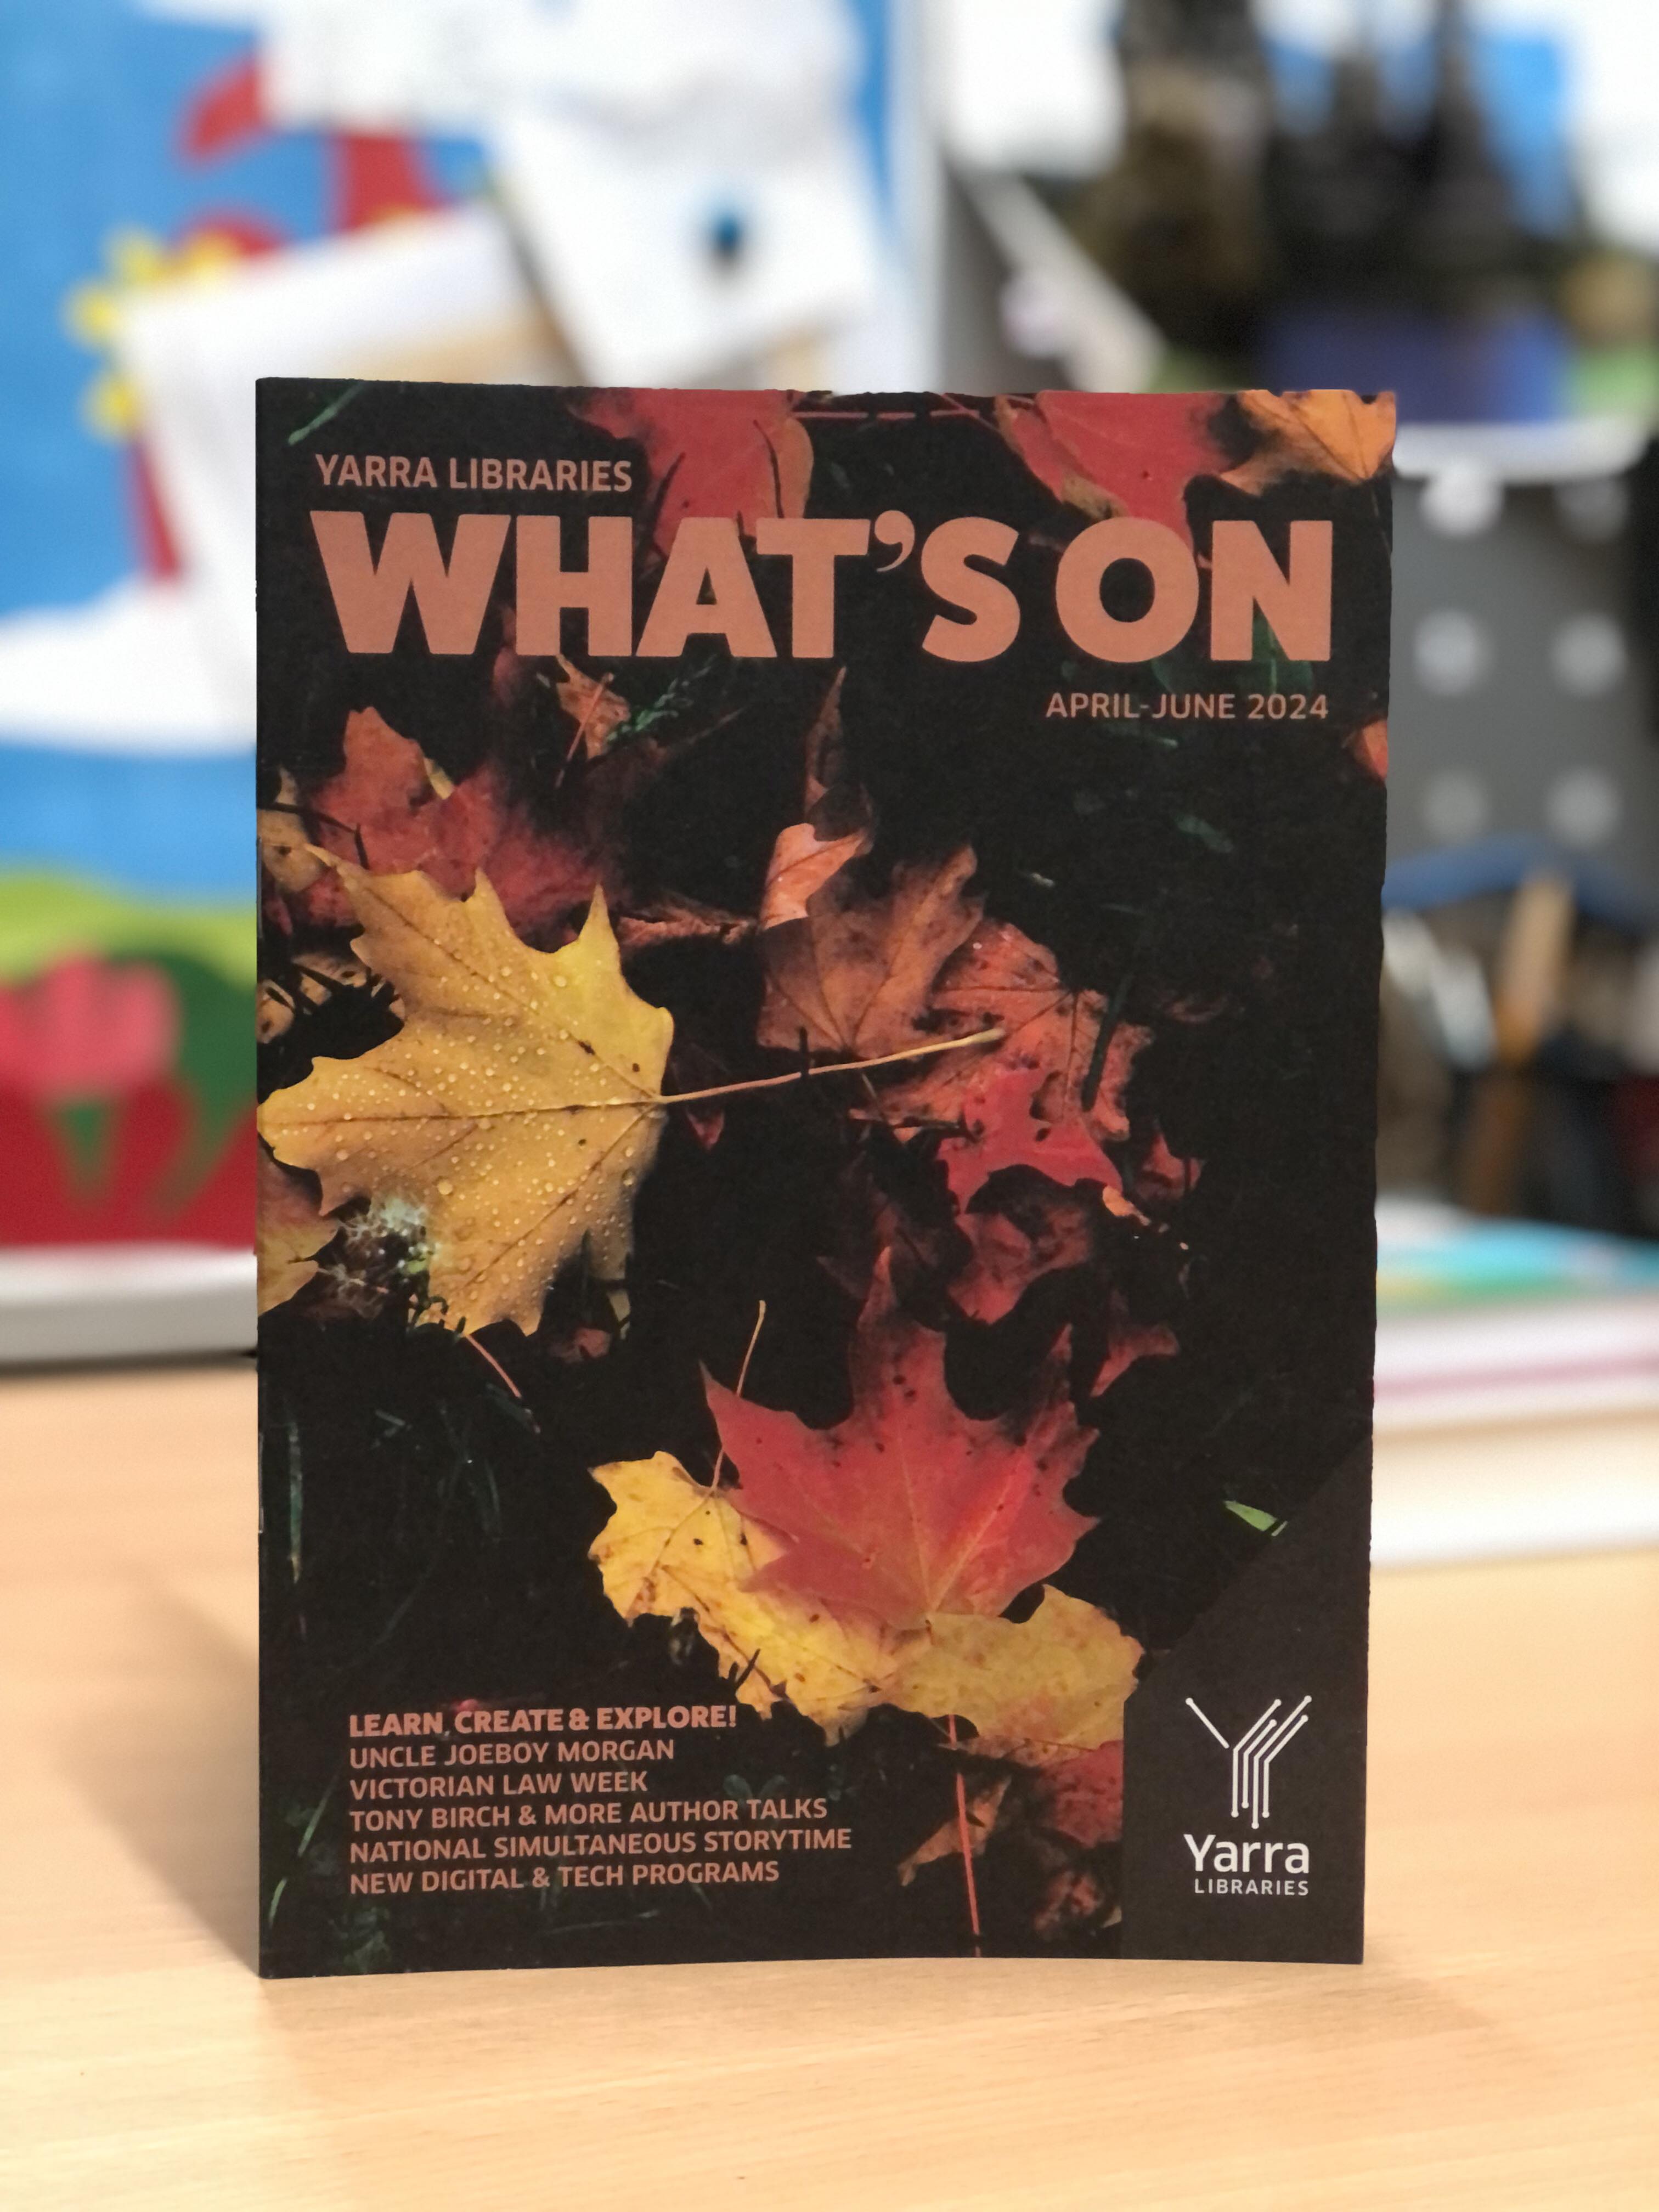 The cover of the April-June What's On guide